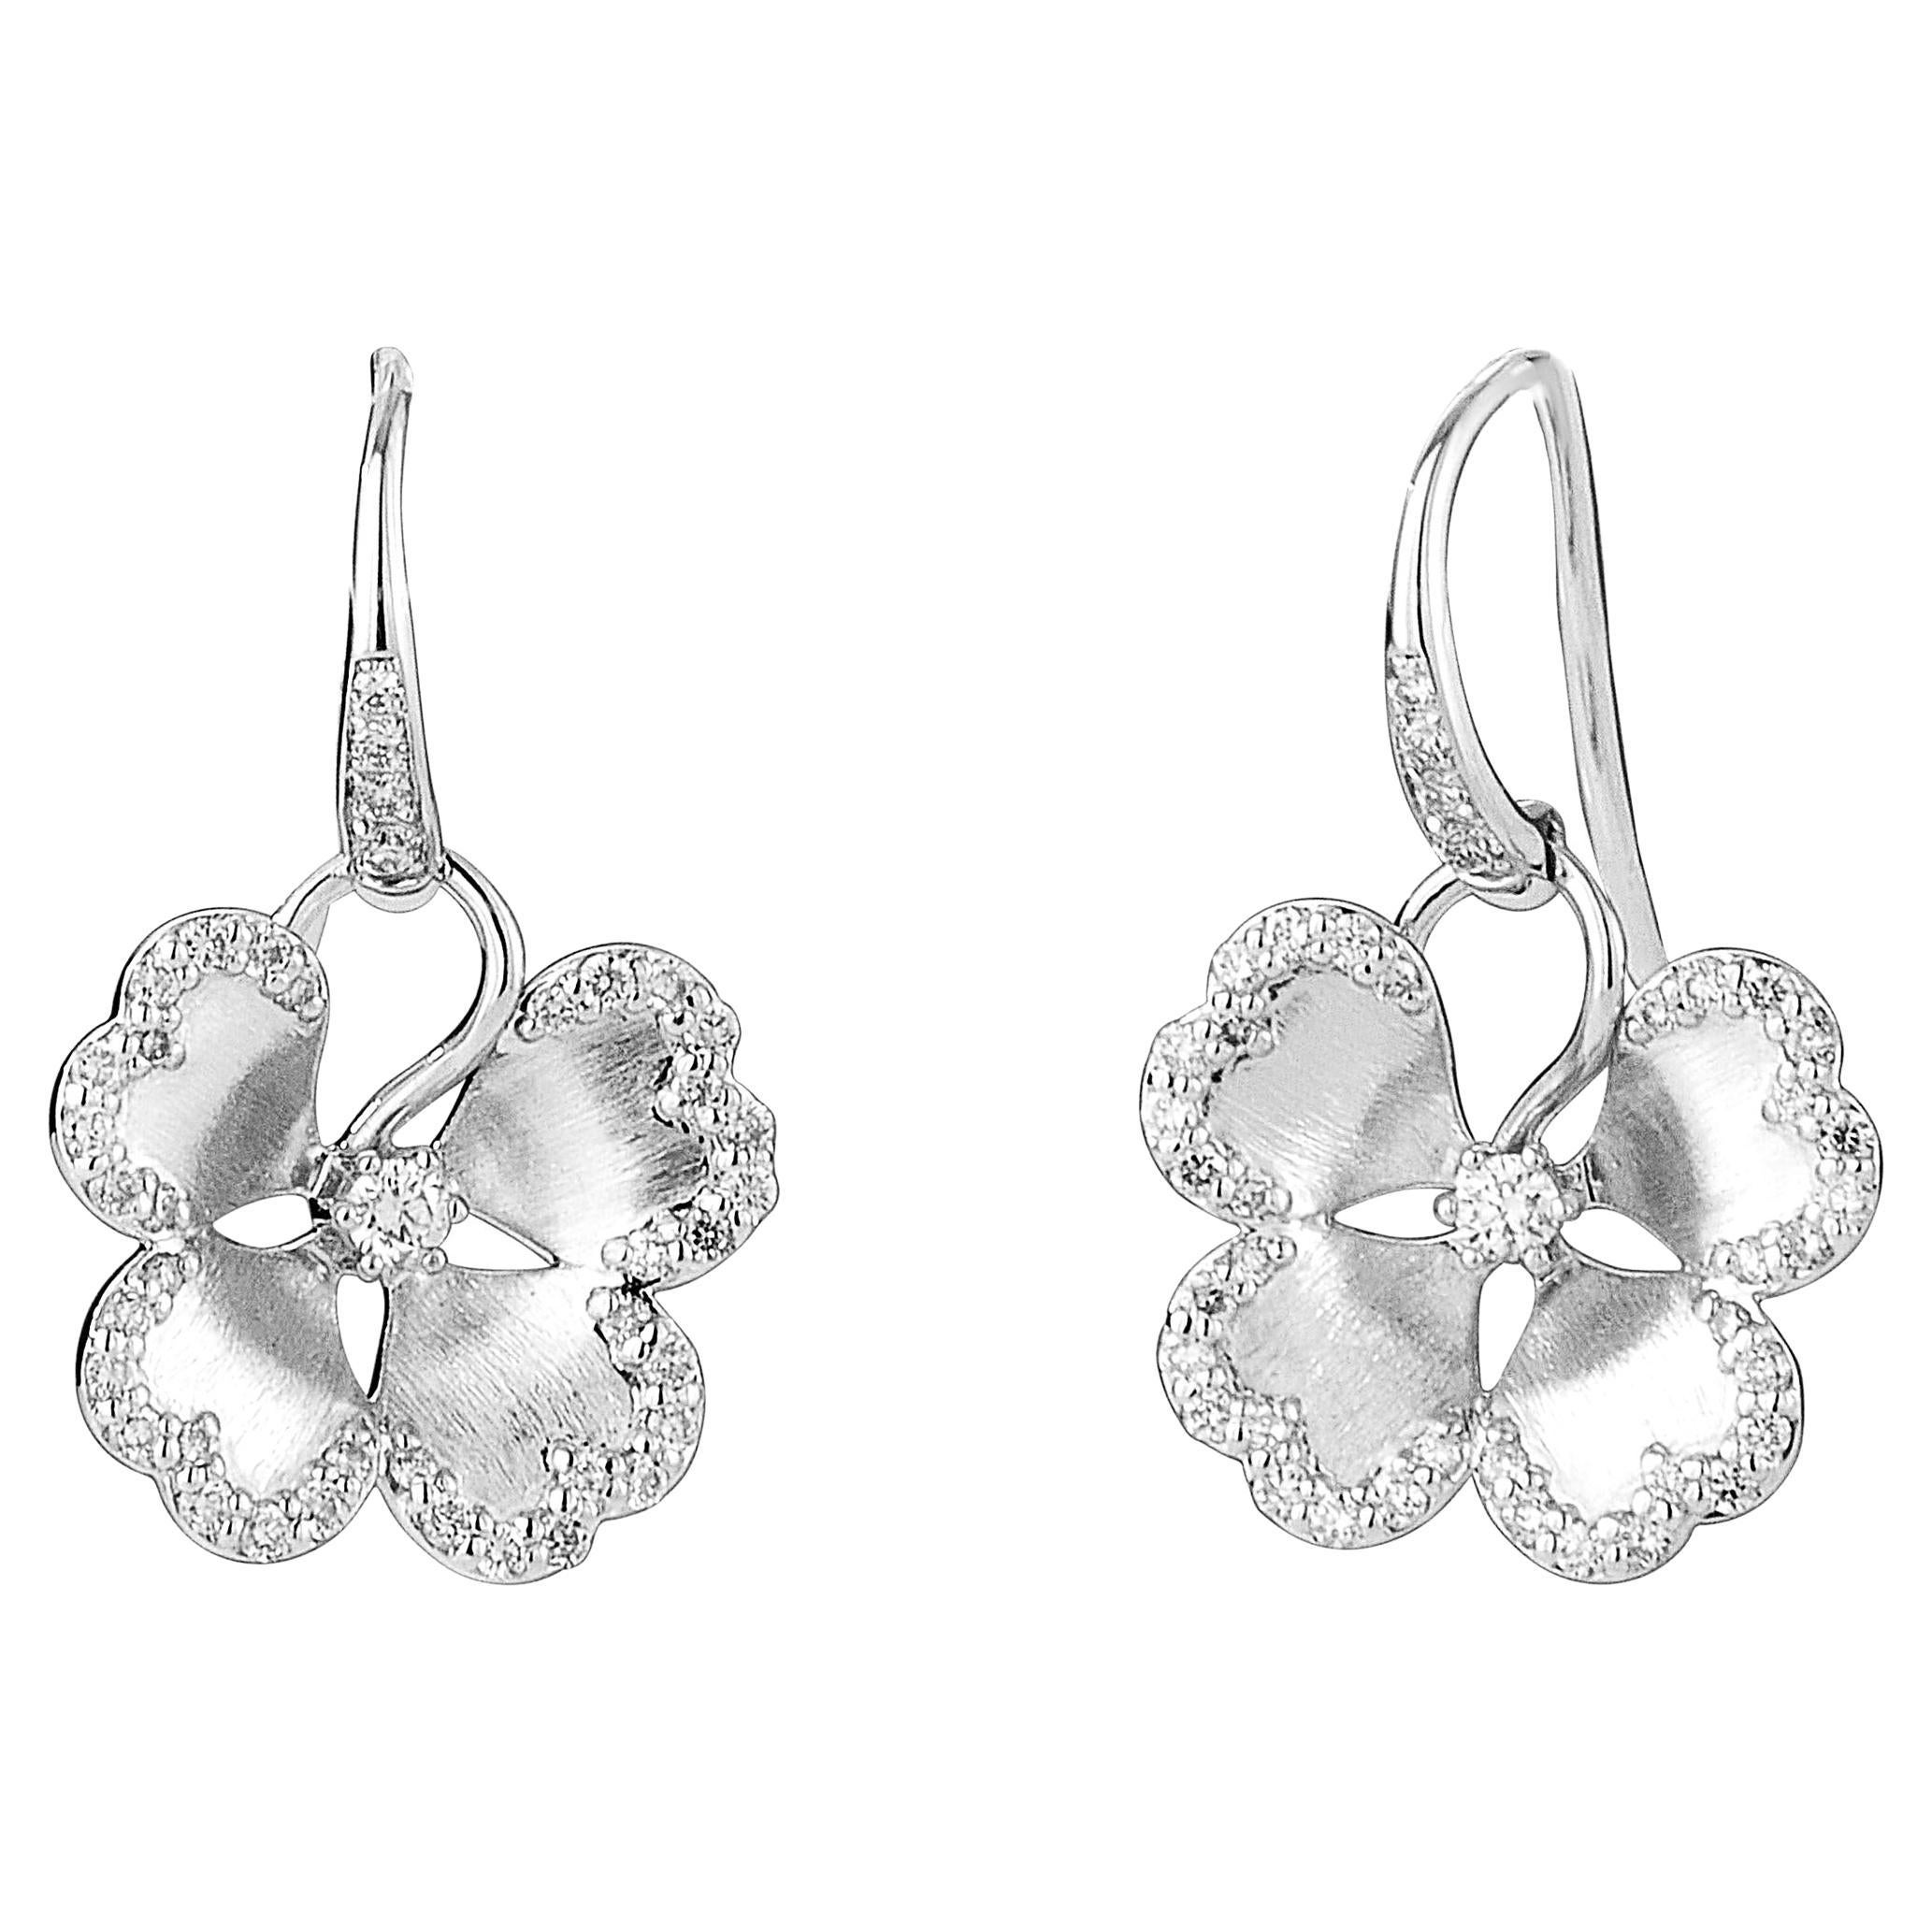 Syna Sterling Silver Clover Earrings with Champagne Diamonds